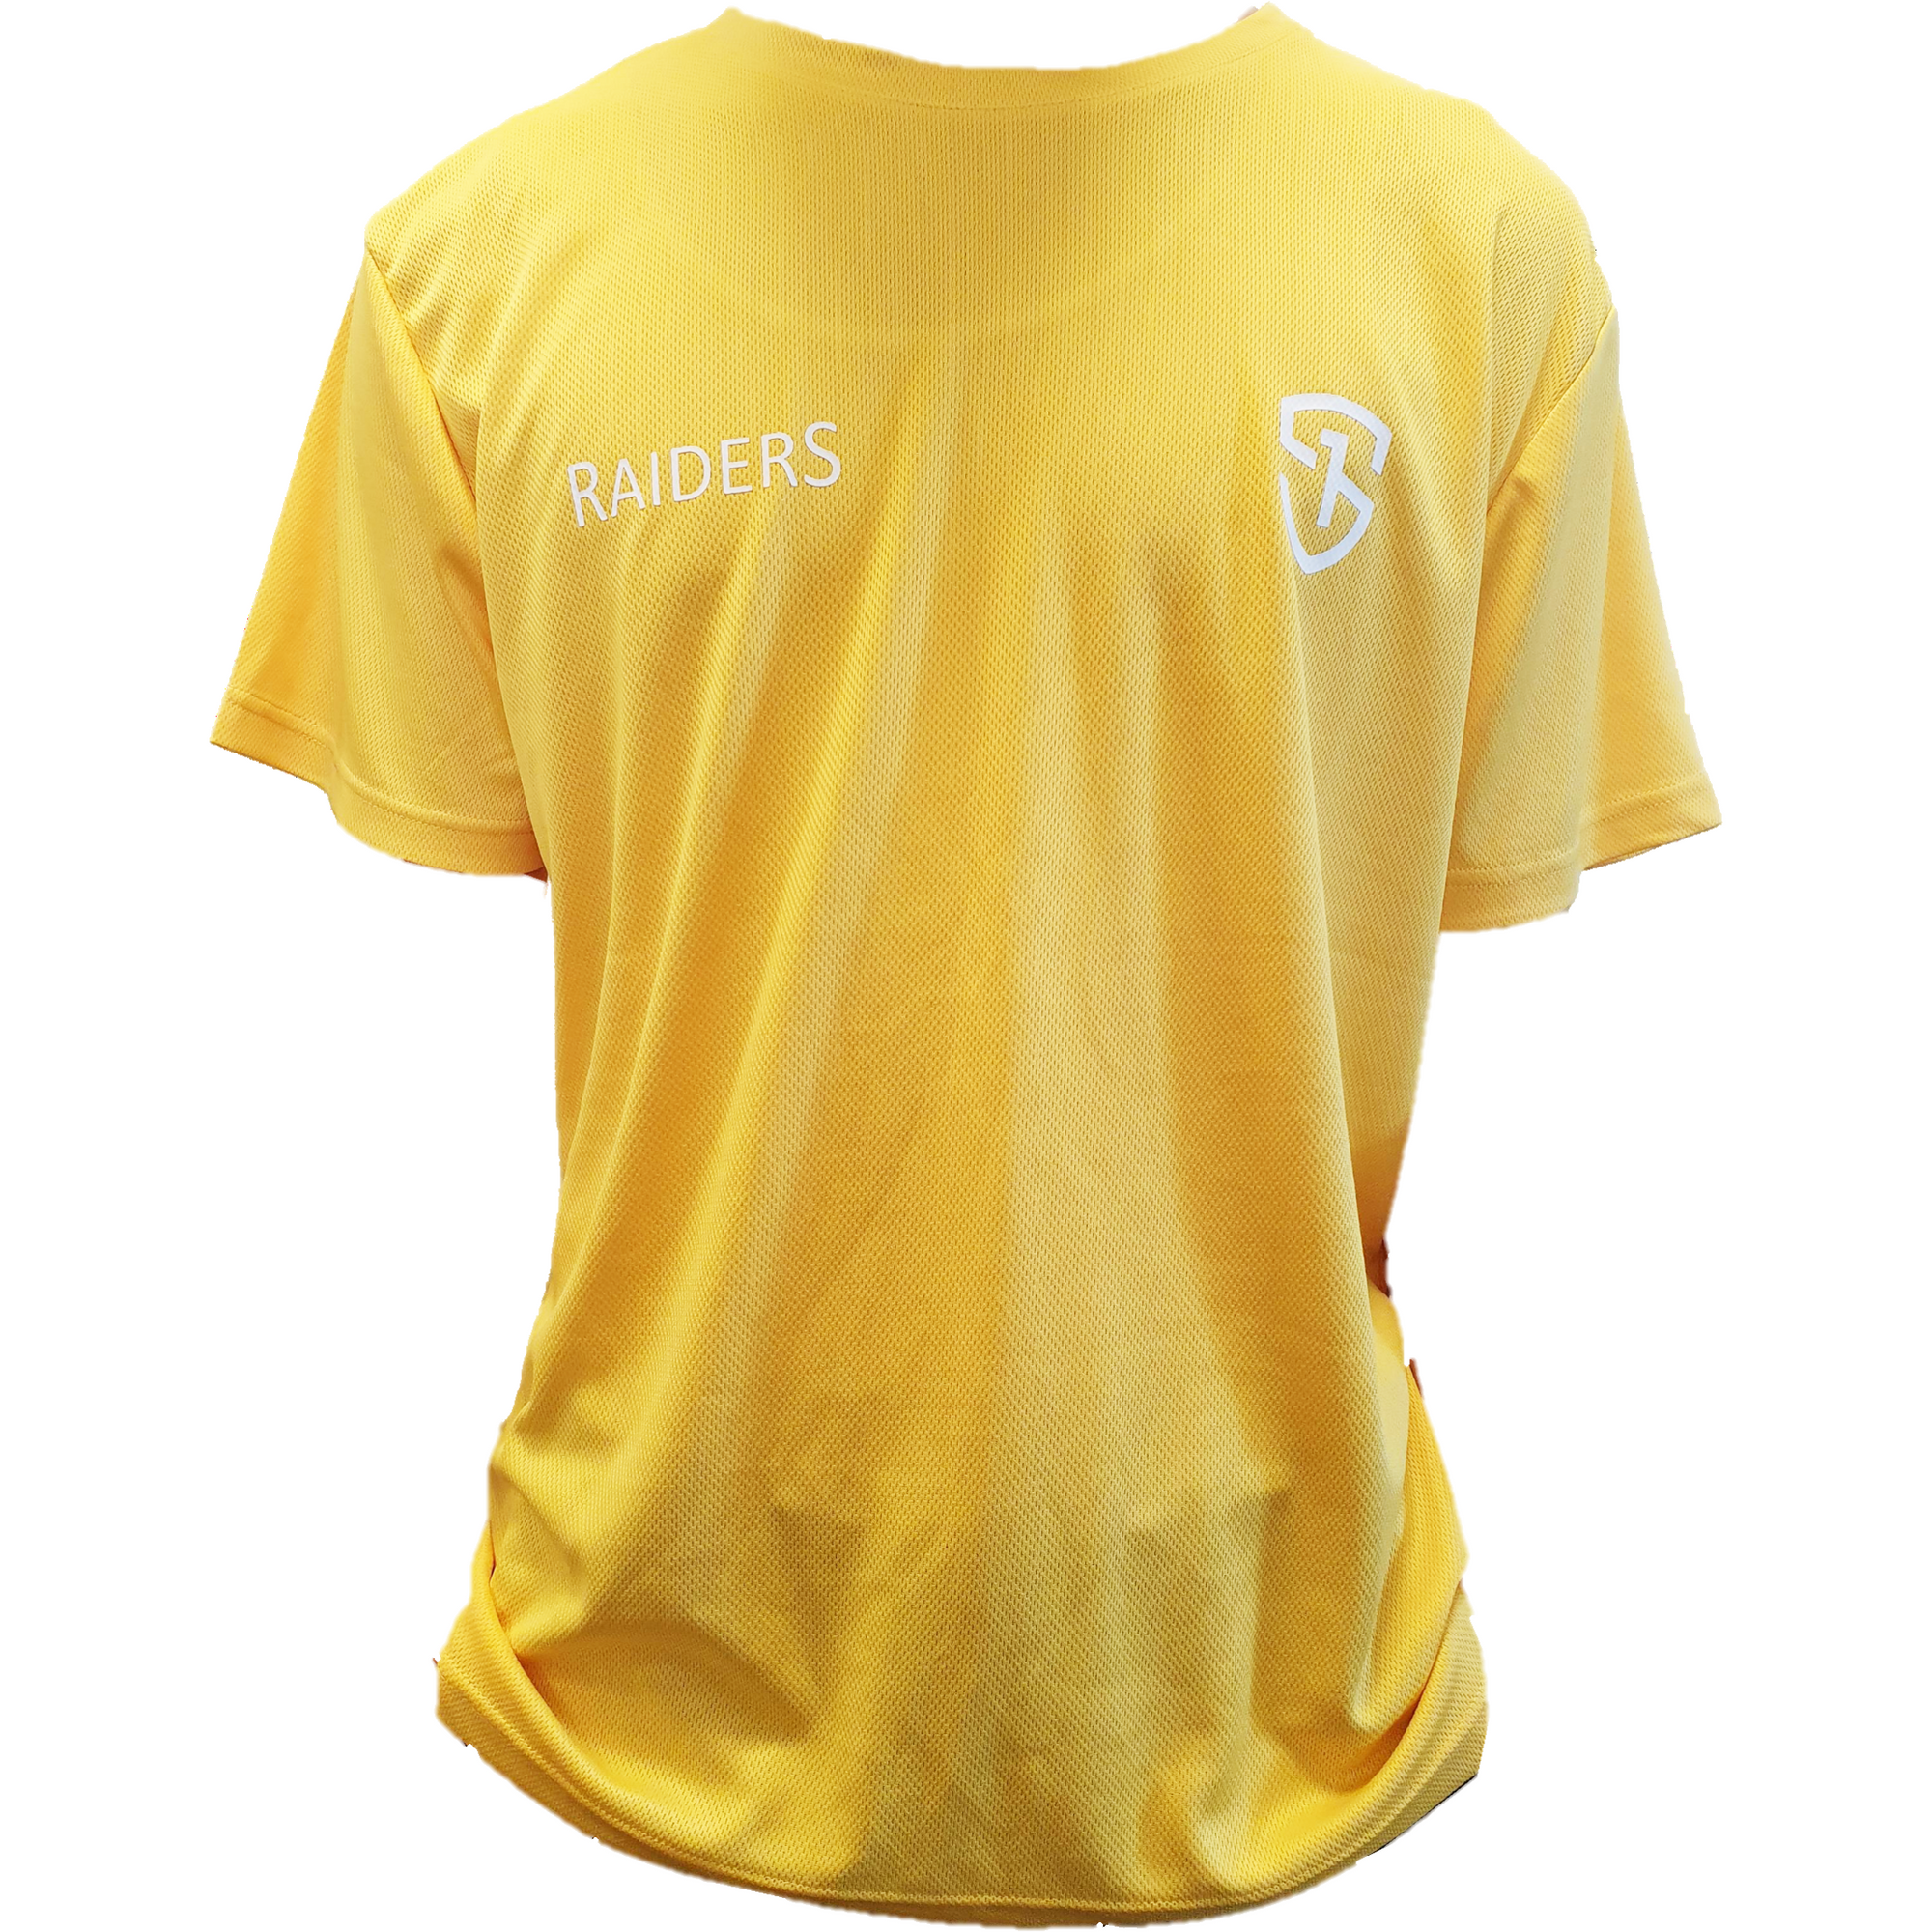 House Team Sports T-shirt Yellow Size 24